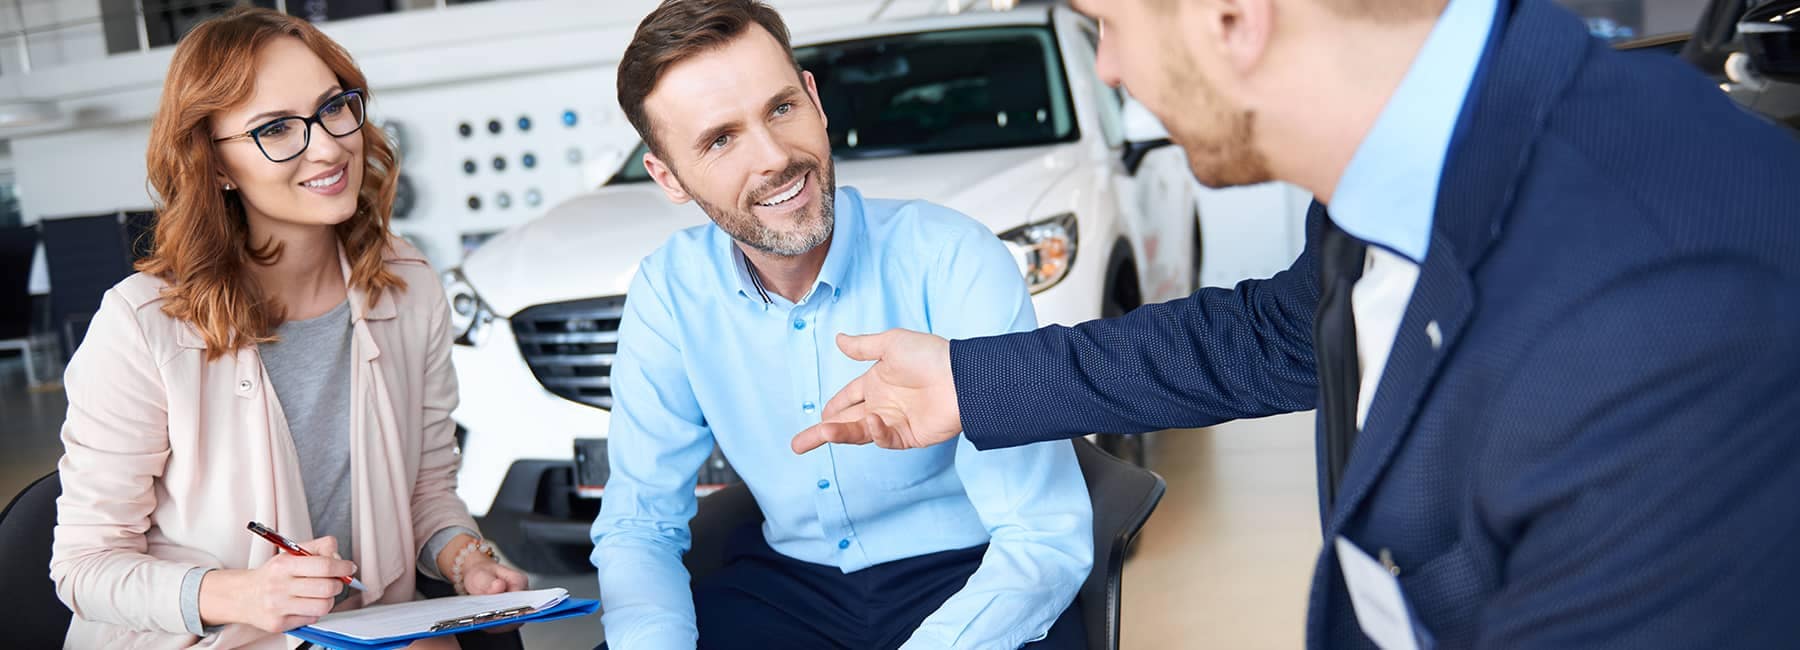 Auto financing professional helping customers apply for a vehicle loan